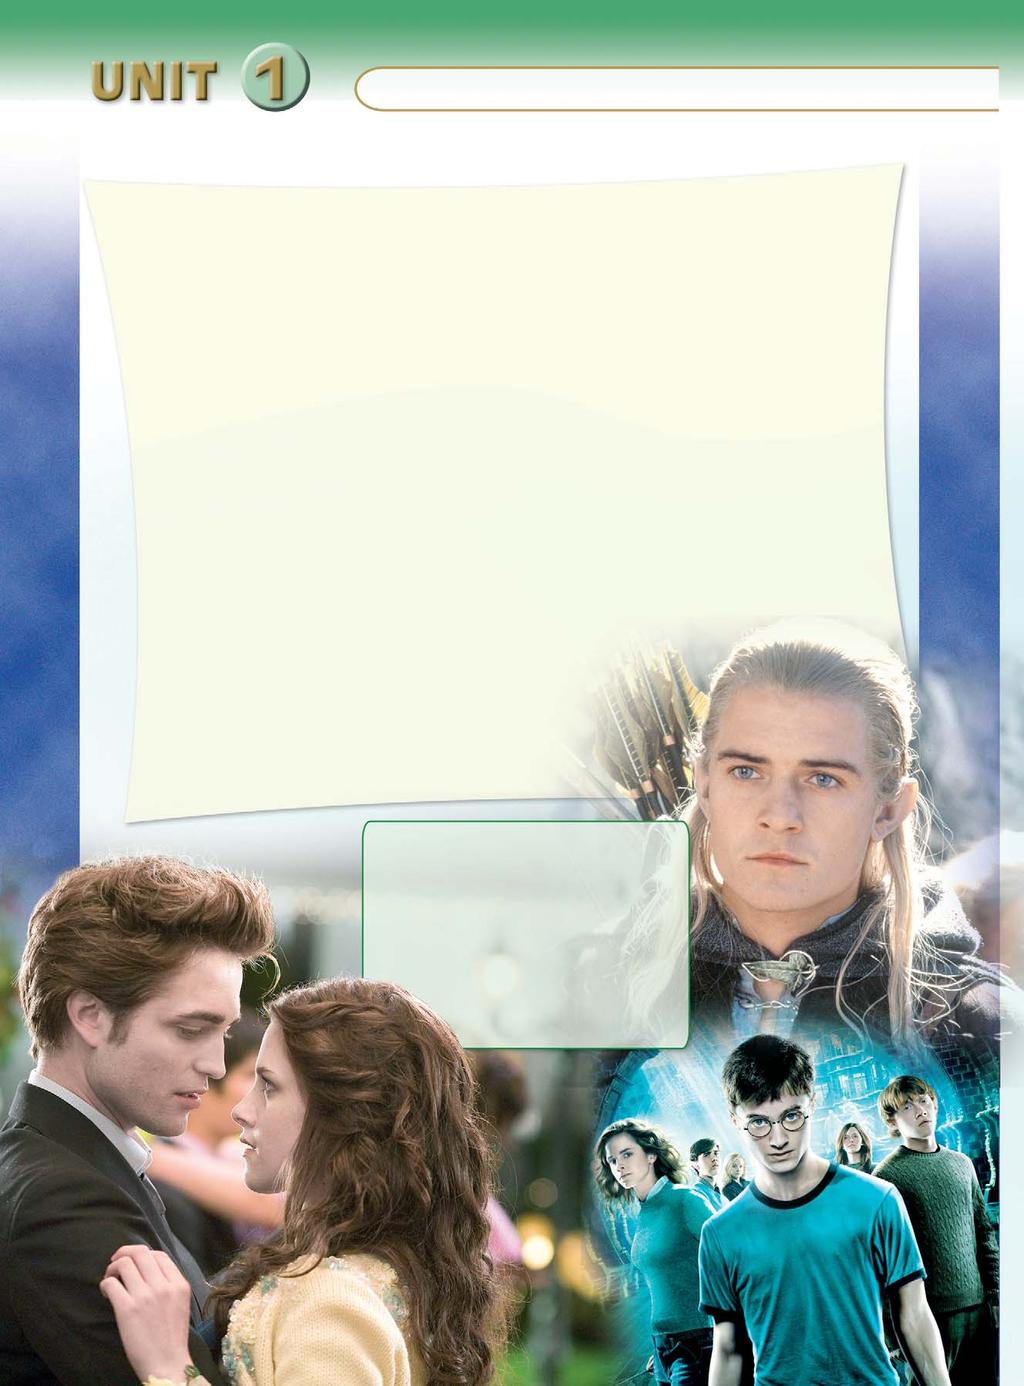 LESSON MODERN MOVIES REDING The Twilight movies hve been huge success in movie theters worldwide. They center on love story between humn, Bell Swn, nd vmpire, Edwrd Cullen.